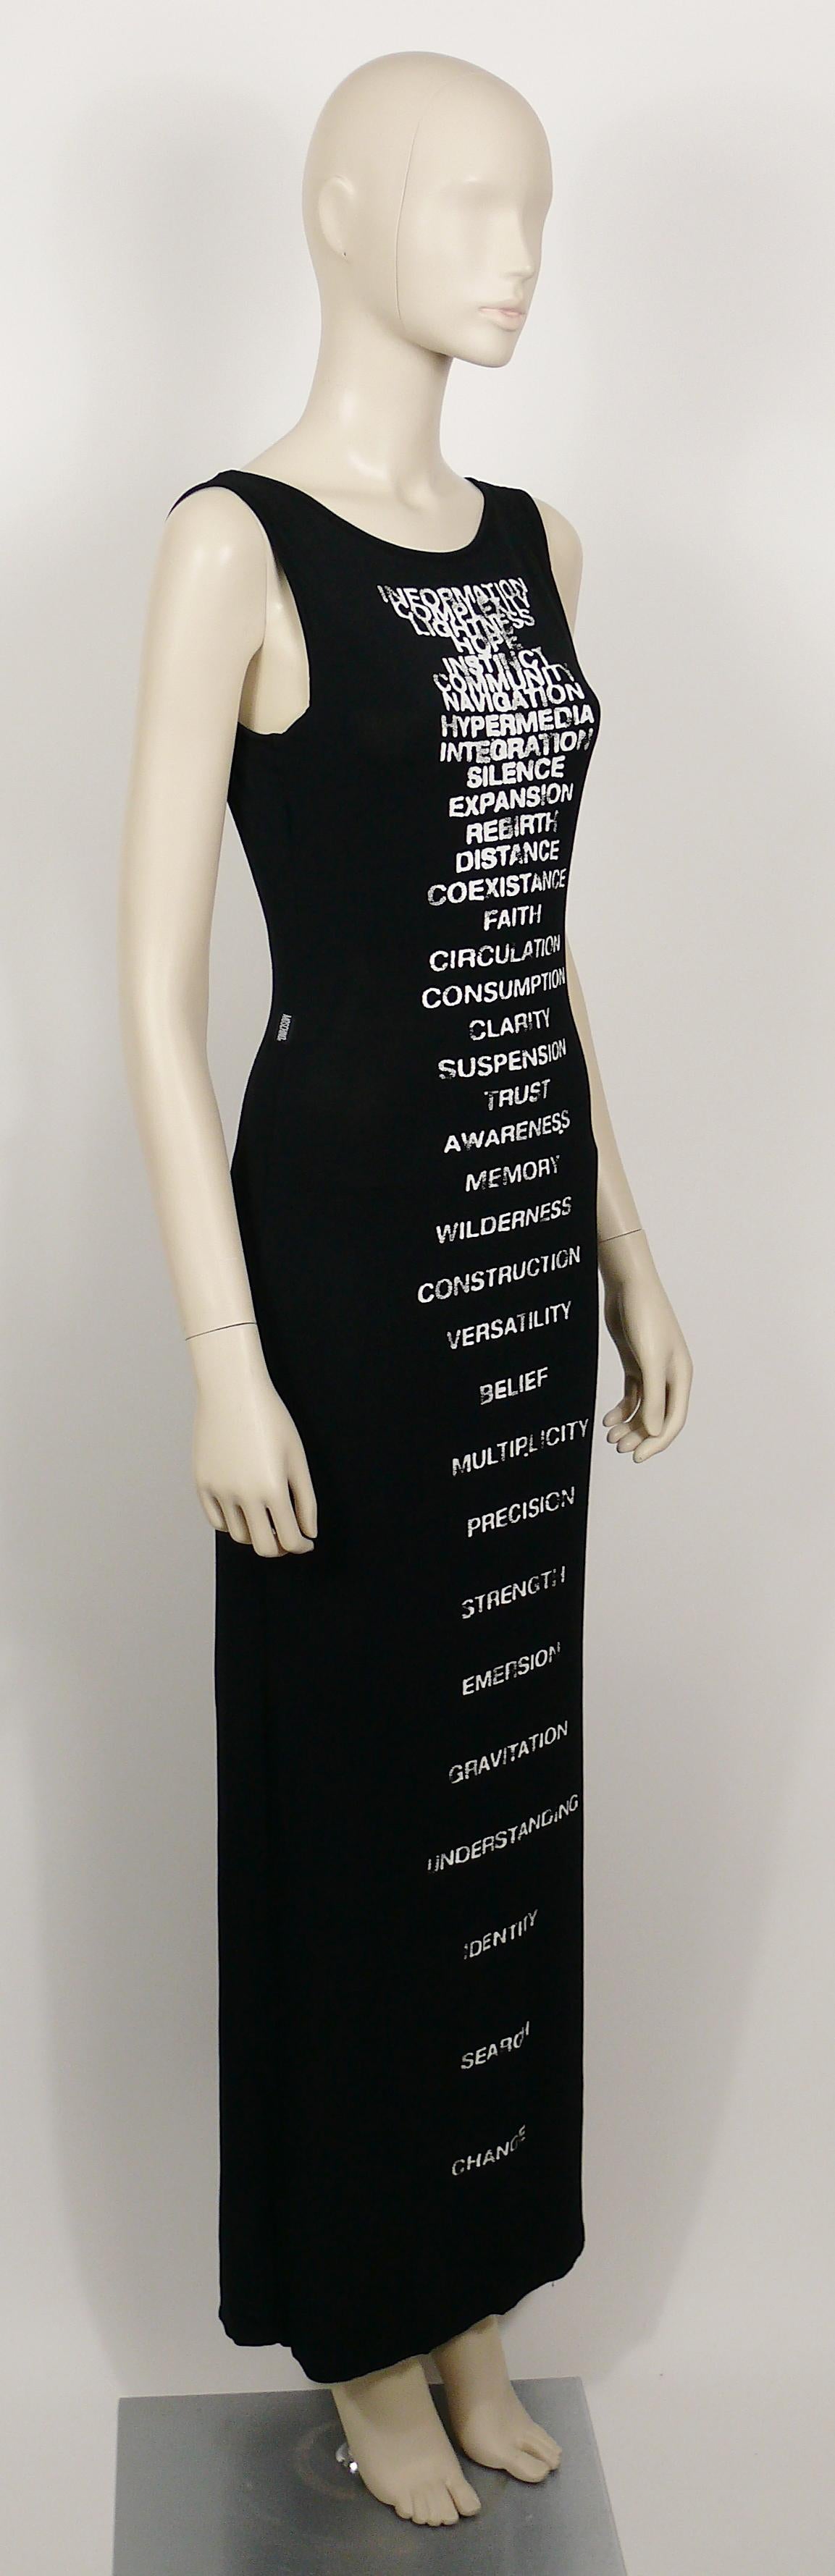 MOSCHINO vintage black maxi tank dress with all over text.

This dress features :
- Black hugging synthetic with spandex material.
- White print distressed lettering with words 